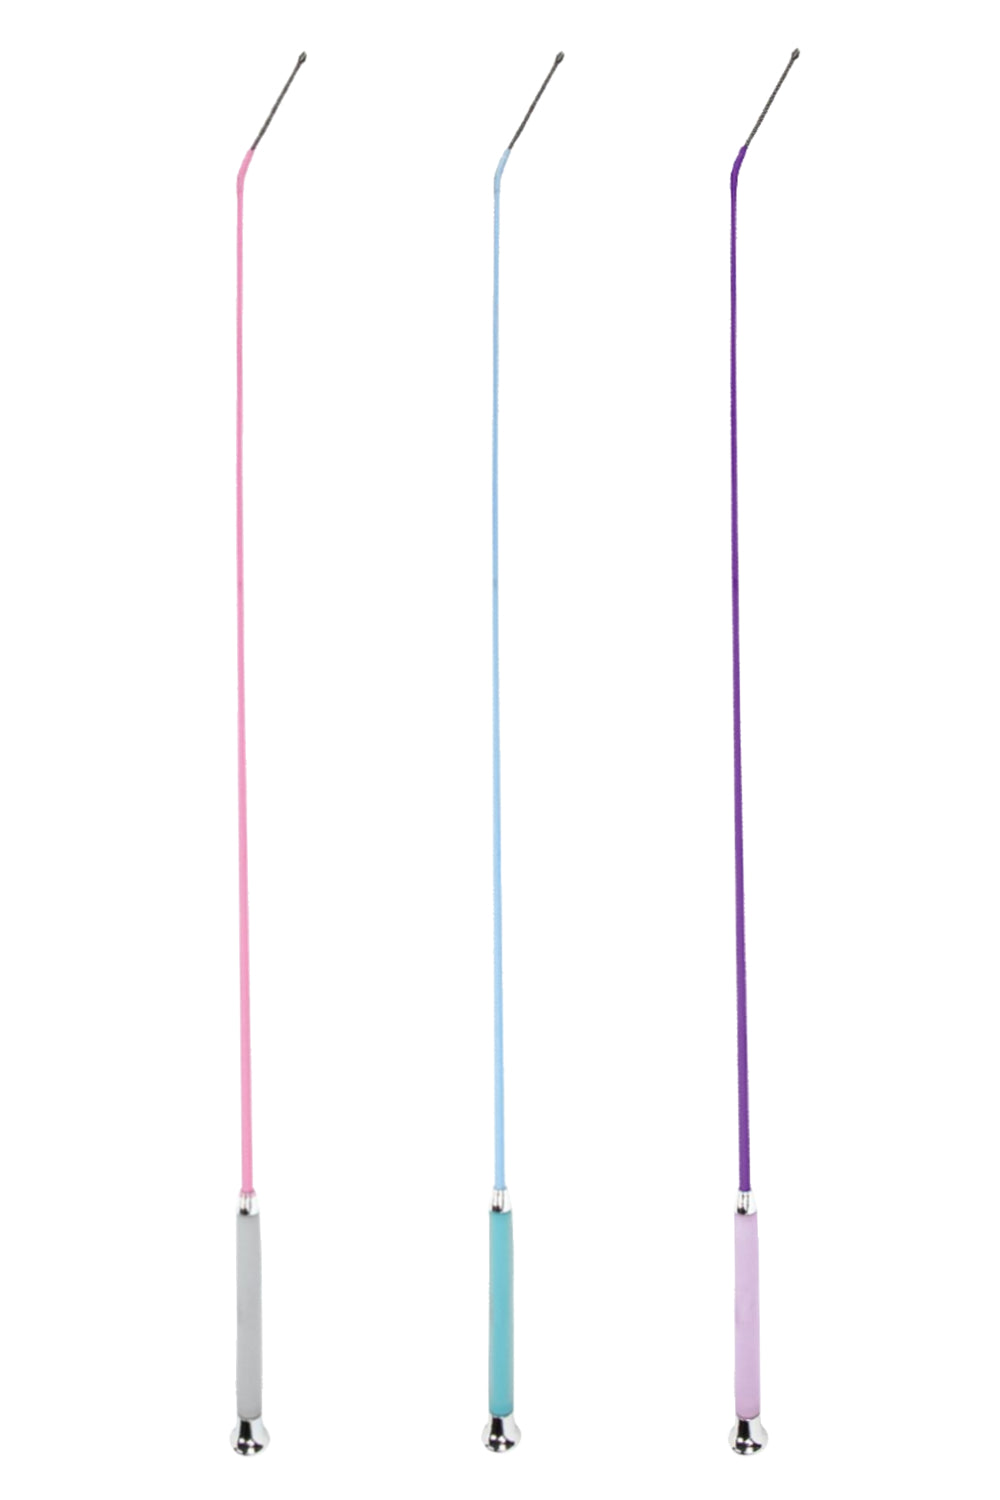 Dublin Dressage Whip With Gel Handle in Hot Pink/Grey, Lilac/Purple, Sky Blue/Royal Blue